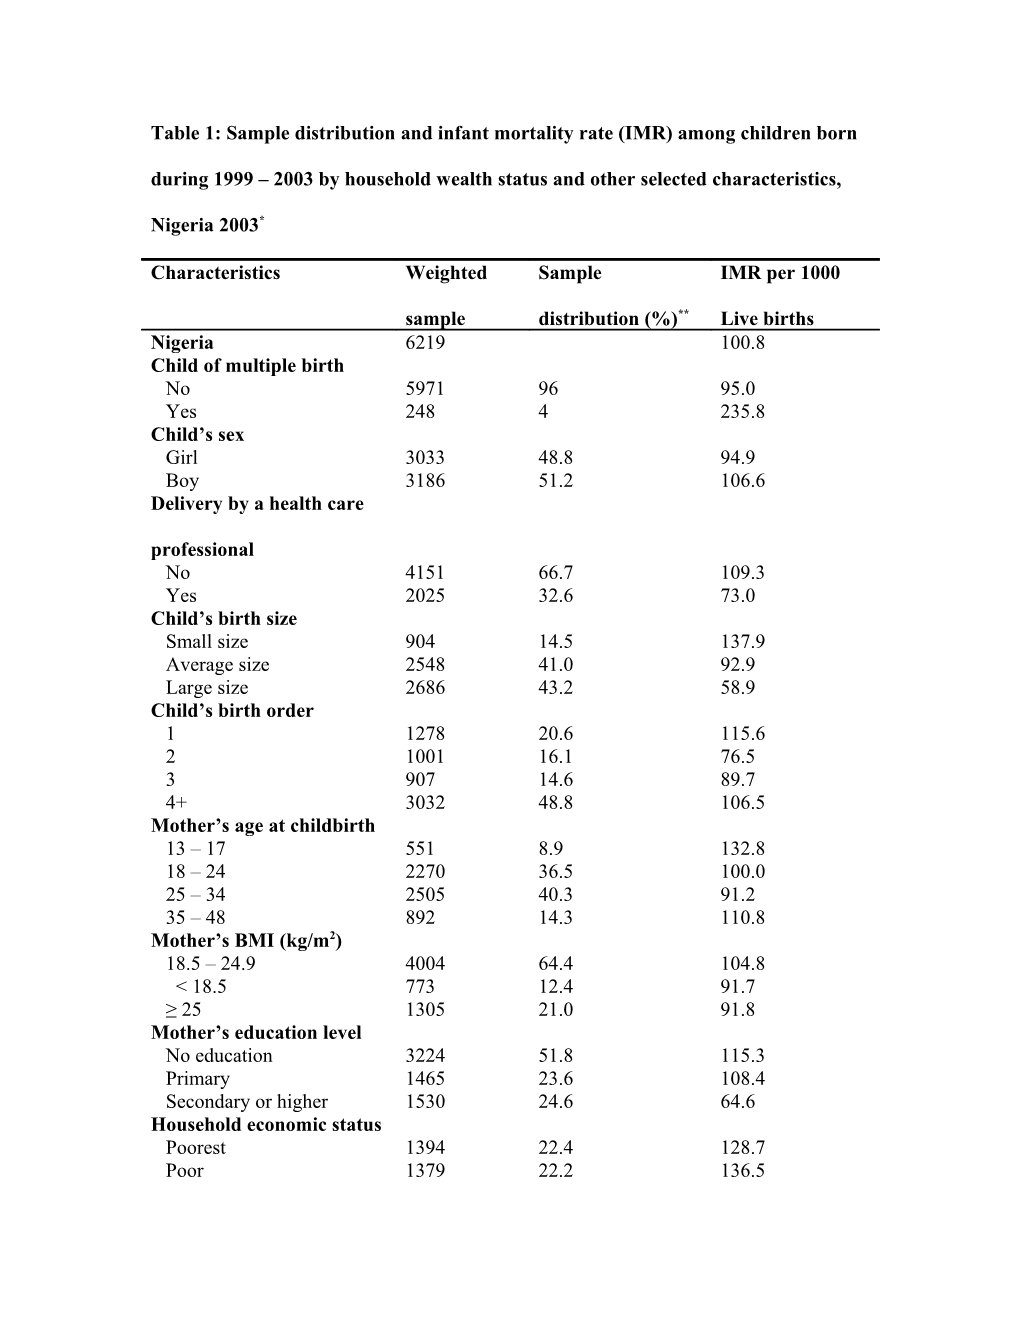 Table 1: Sample Distribution And Infant Mortality Rate (IMR) Among Children Born During 1999 – 2003 By Household Wealth Status And Other Selected Characteristics, Nigeria 2003*